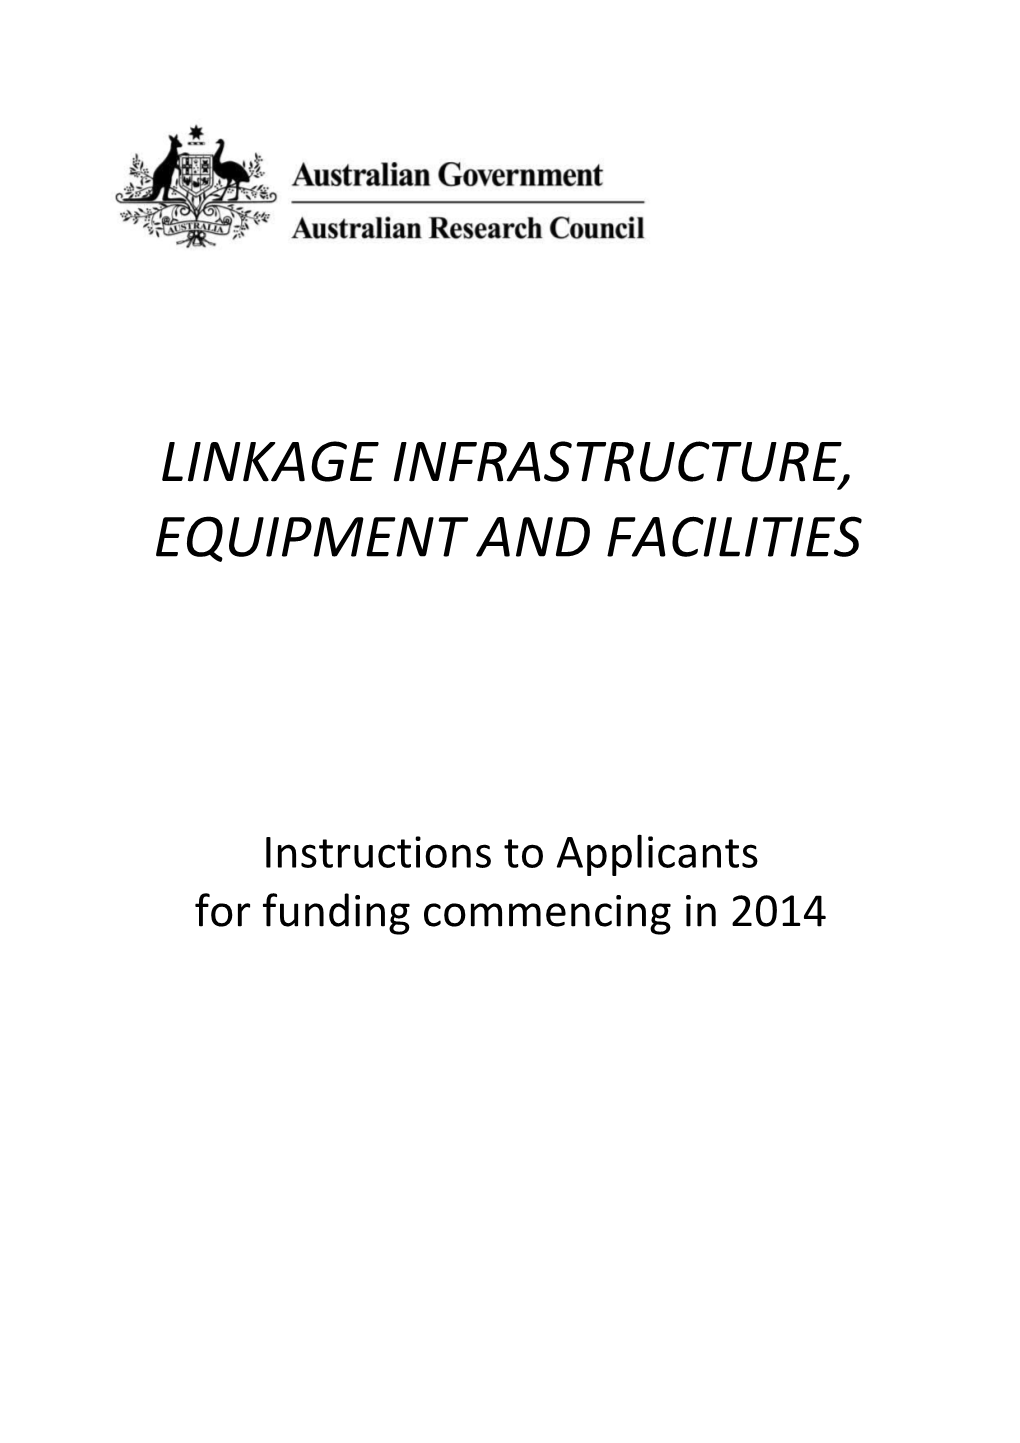 Linkage Infrastructure, Equipment and Facilities